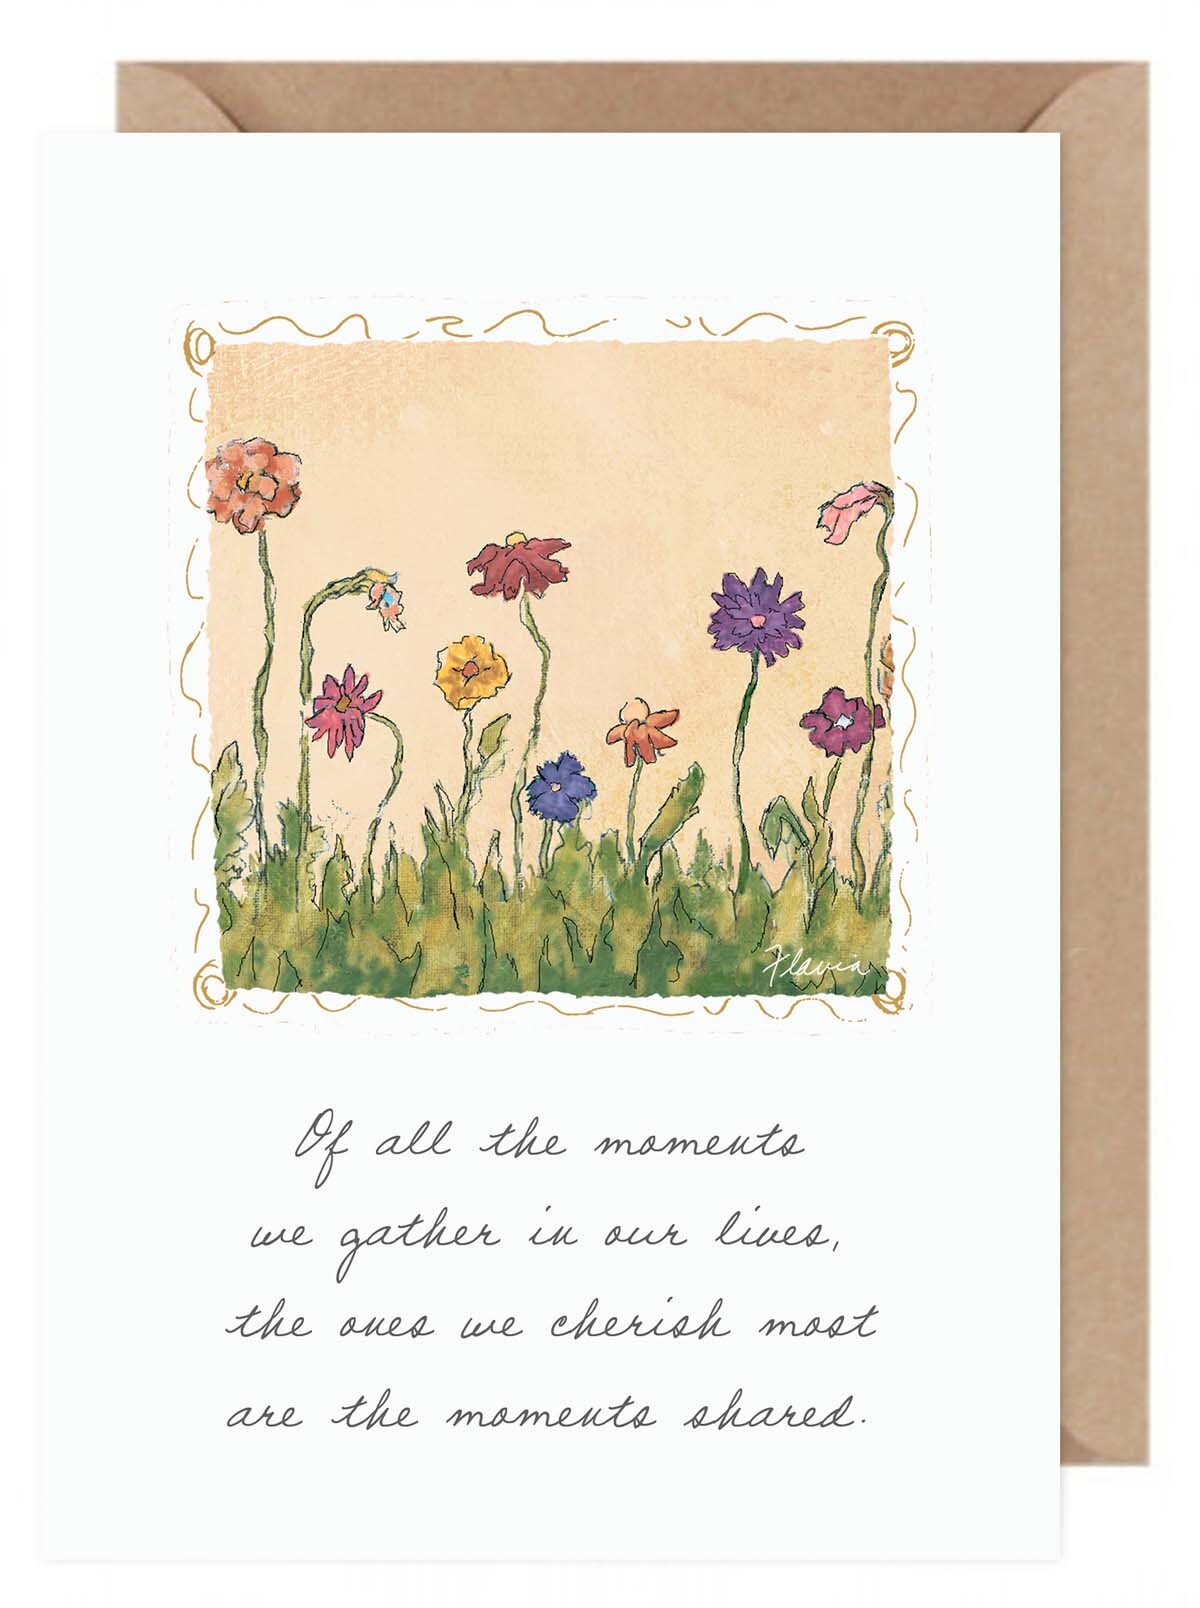 Shared Moments  - a Flavia Weedn inspirational greeting card  0003-2158